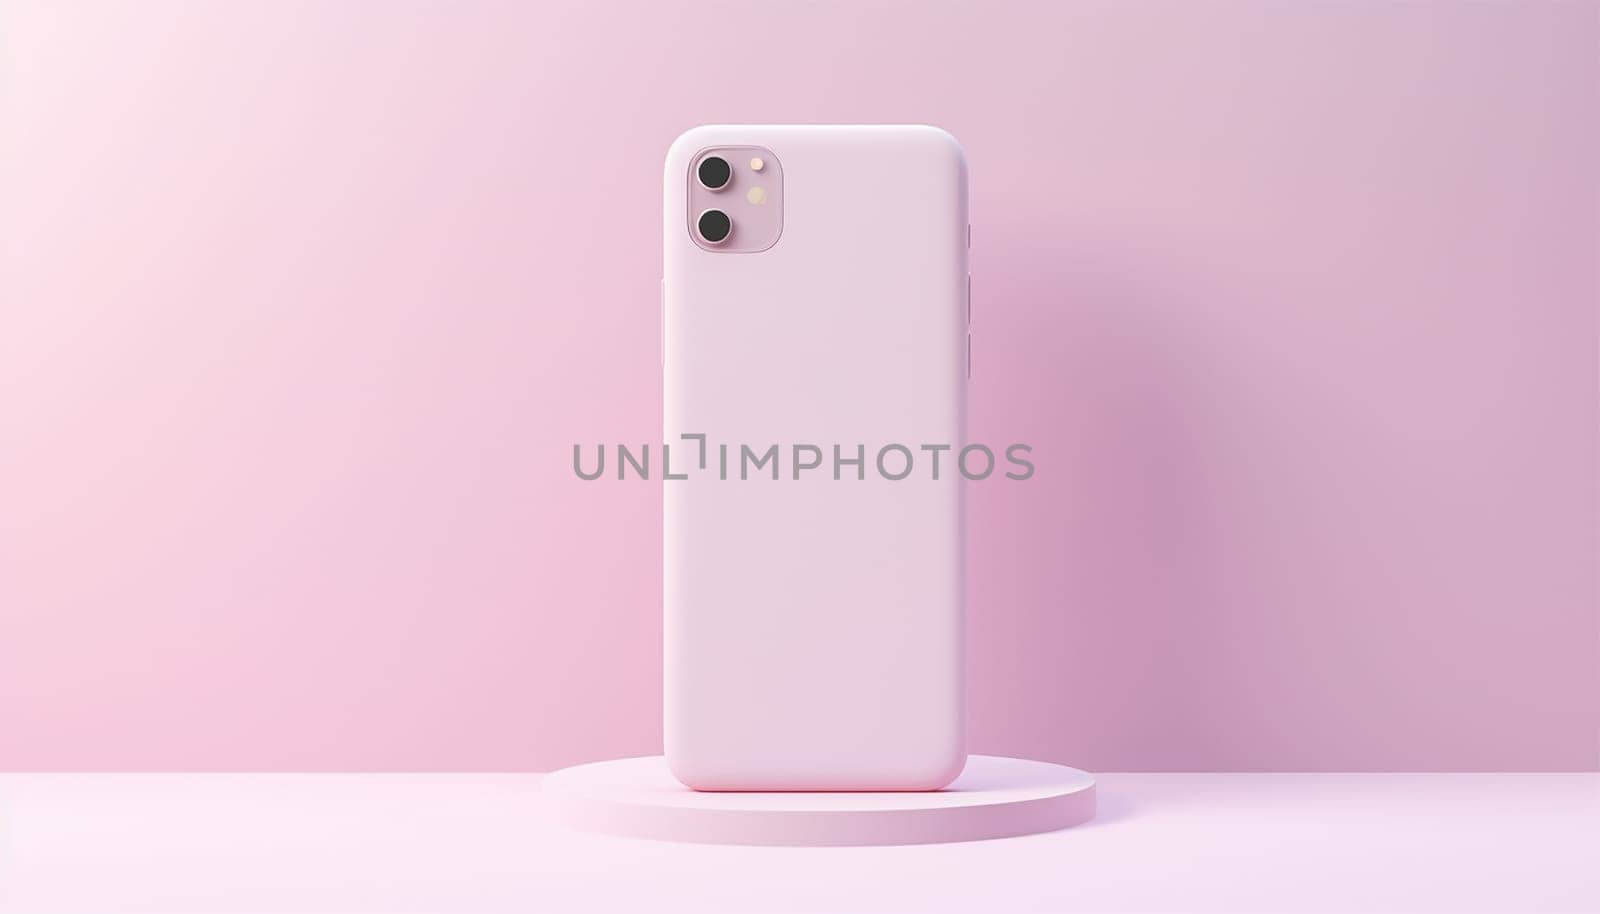 Minimalist modern clay mockup smartphones for presentation, application display, information graphics etc. EPS. 3D pastel pink Copy space smartphone mobile concept Space for text